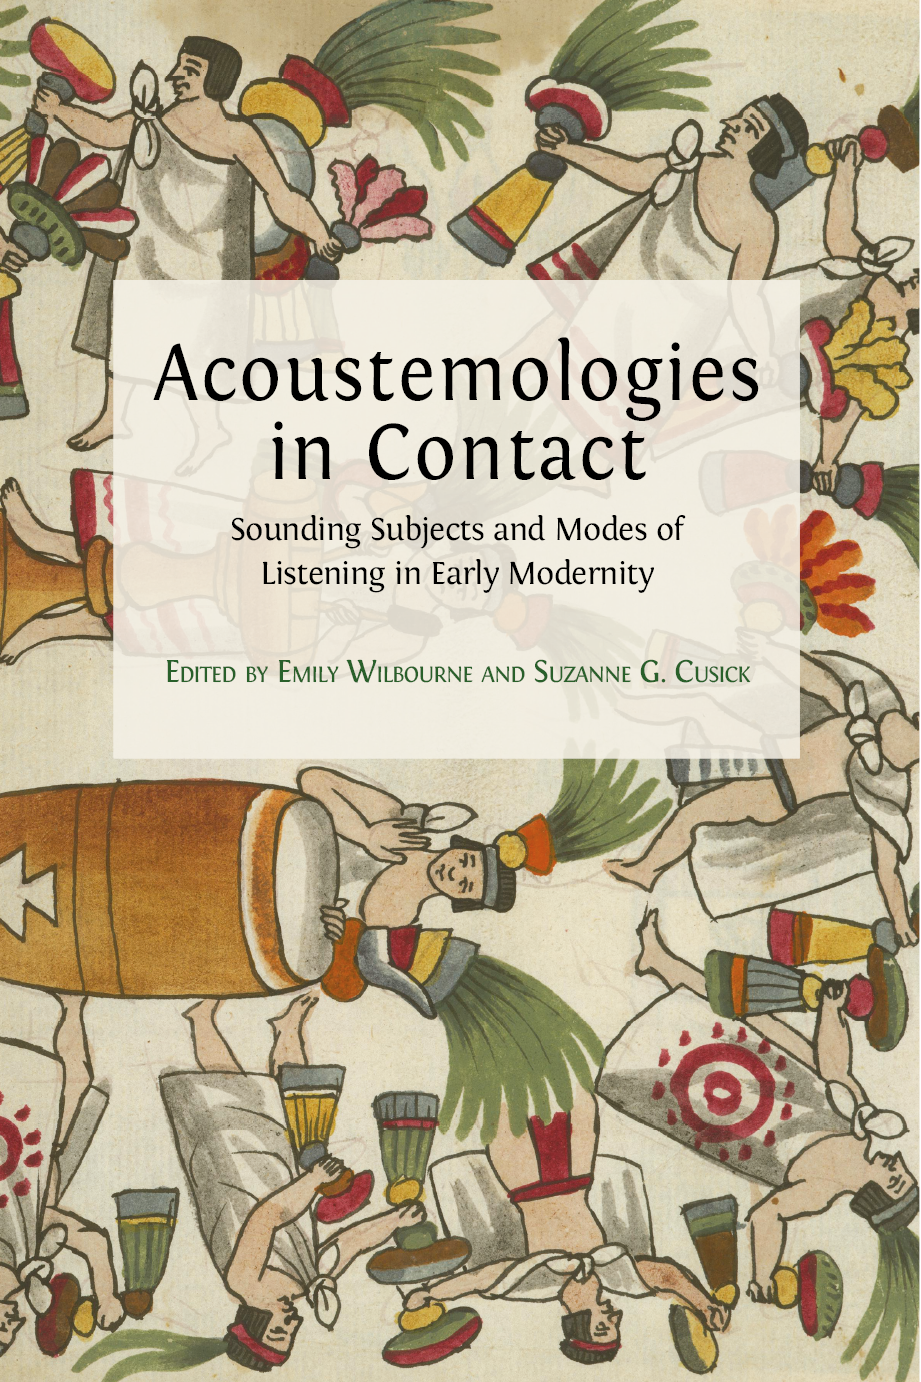 Acoustemologies in Contact book cover image